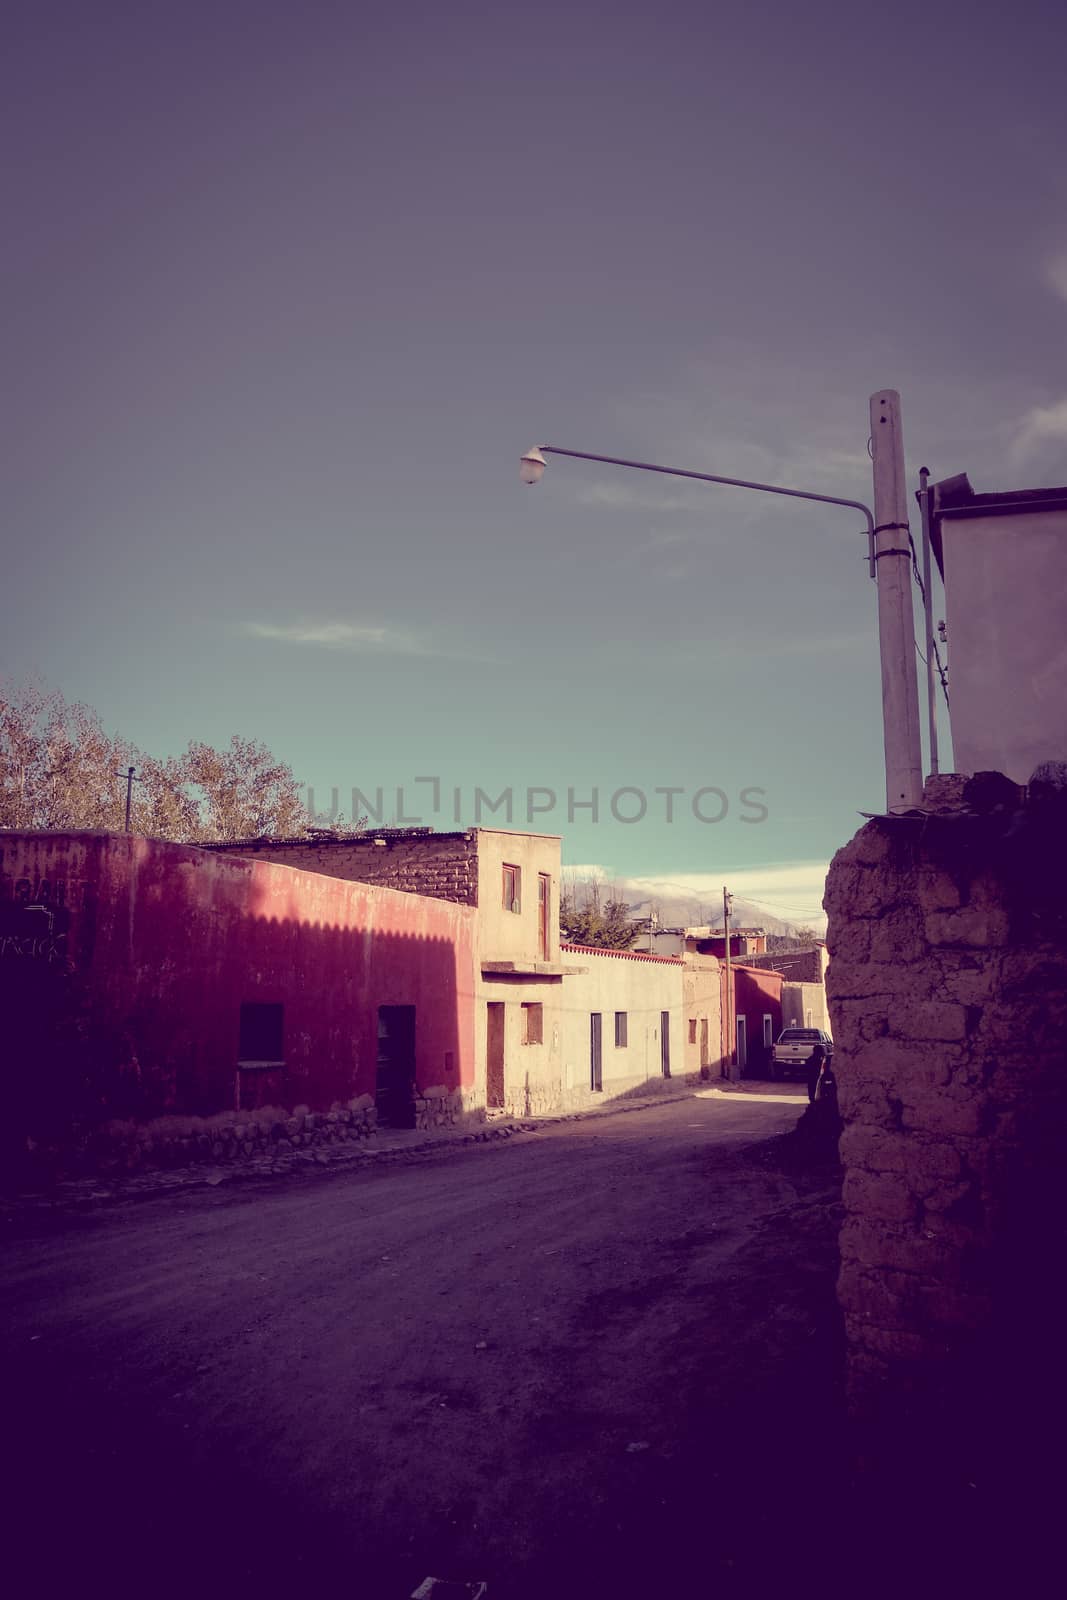 Humahuaca street, Argentina by daboost